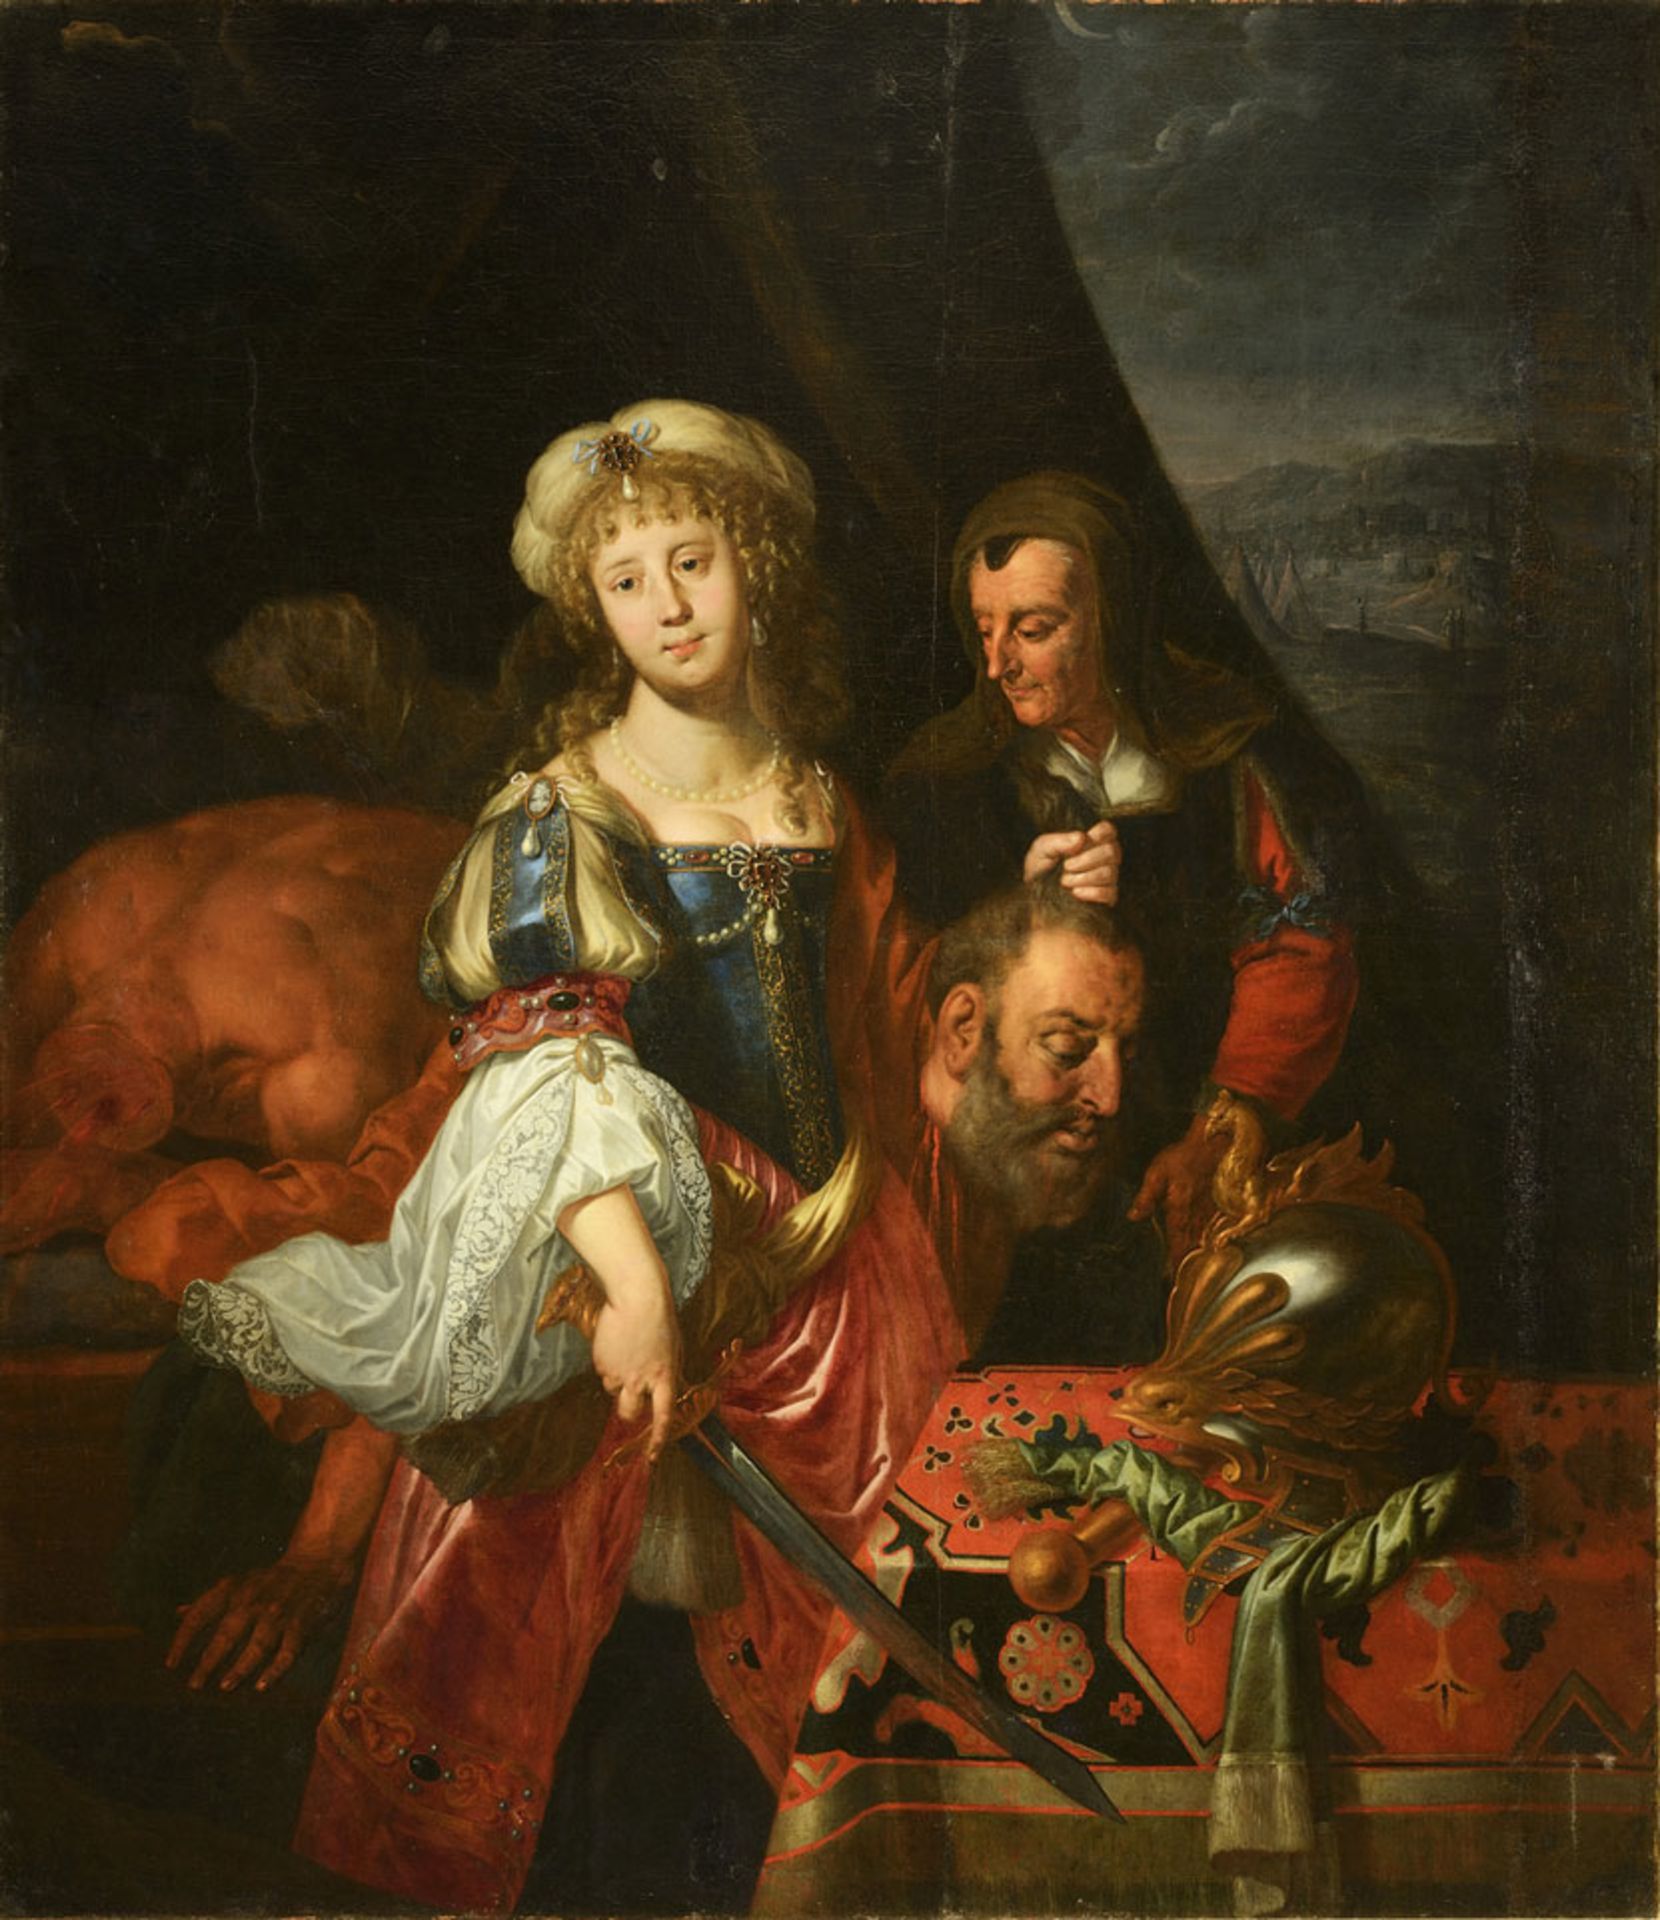 JOHANNES SPILBERG (1619-1690): JUDITH AND THE HEAD OF HOLOFERNES / Around 1650, probably